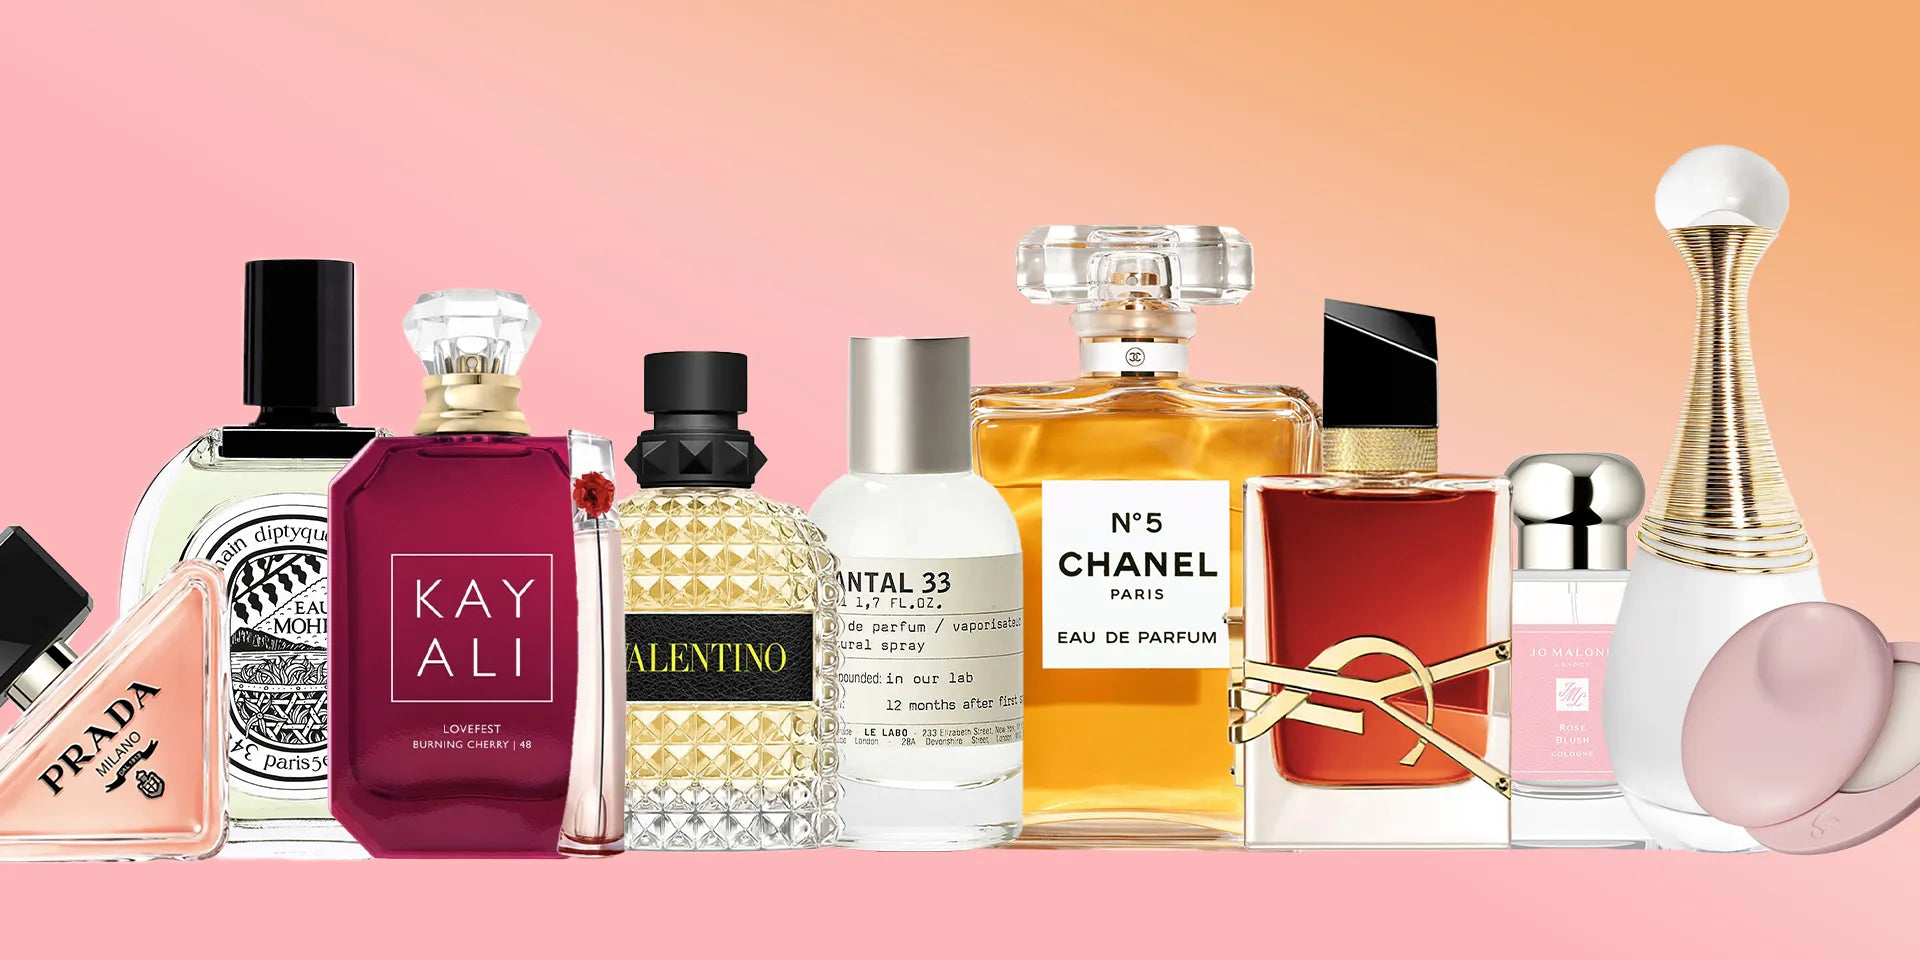 Choosing the Perfect Perfume for Any Occasion: A Practical Guide